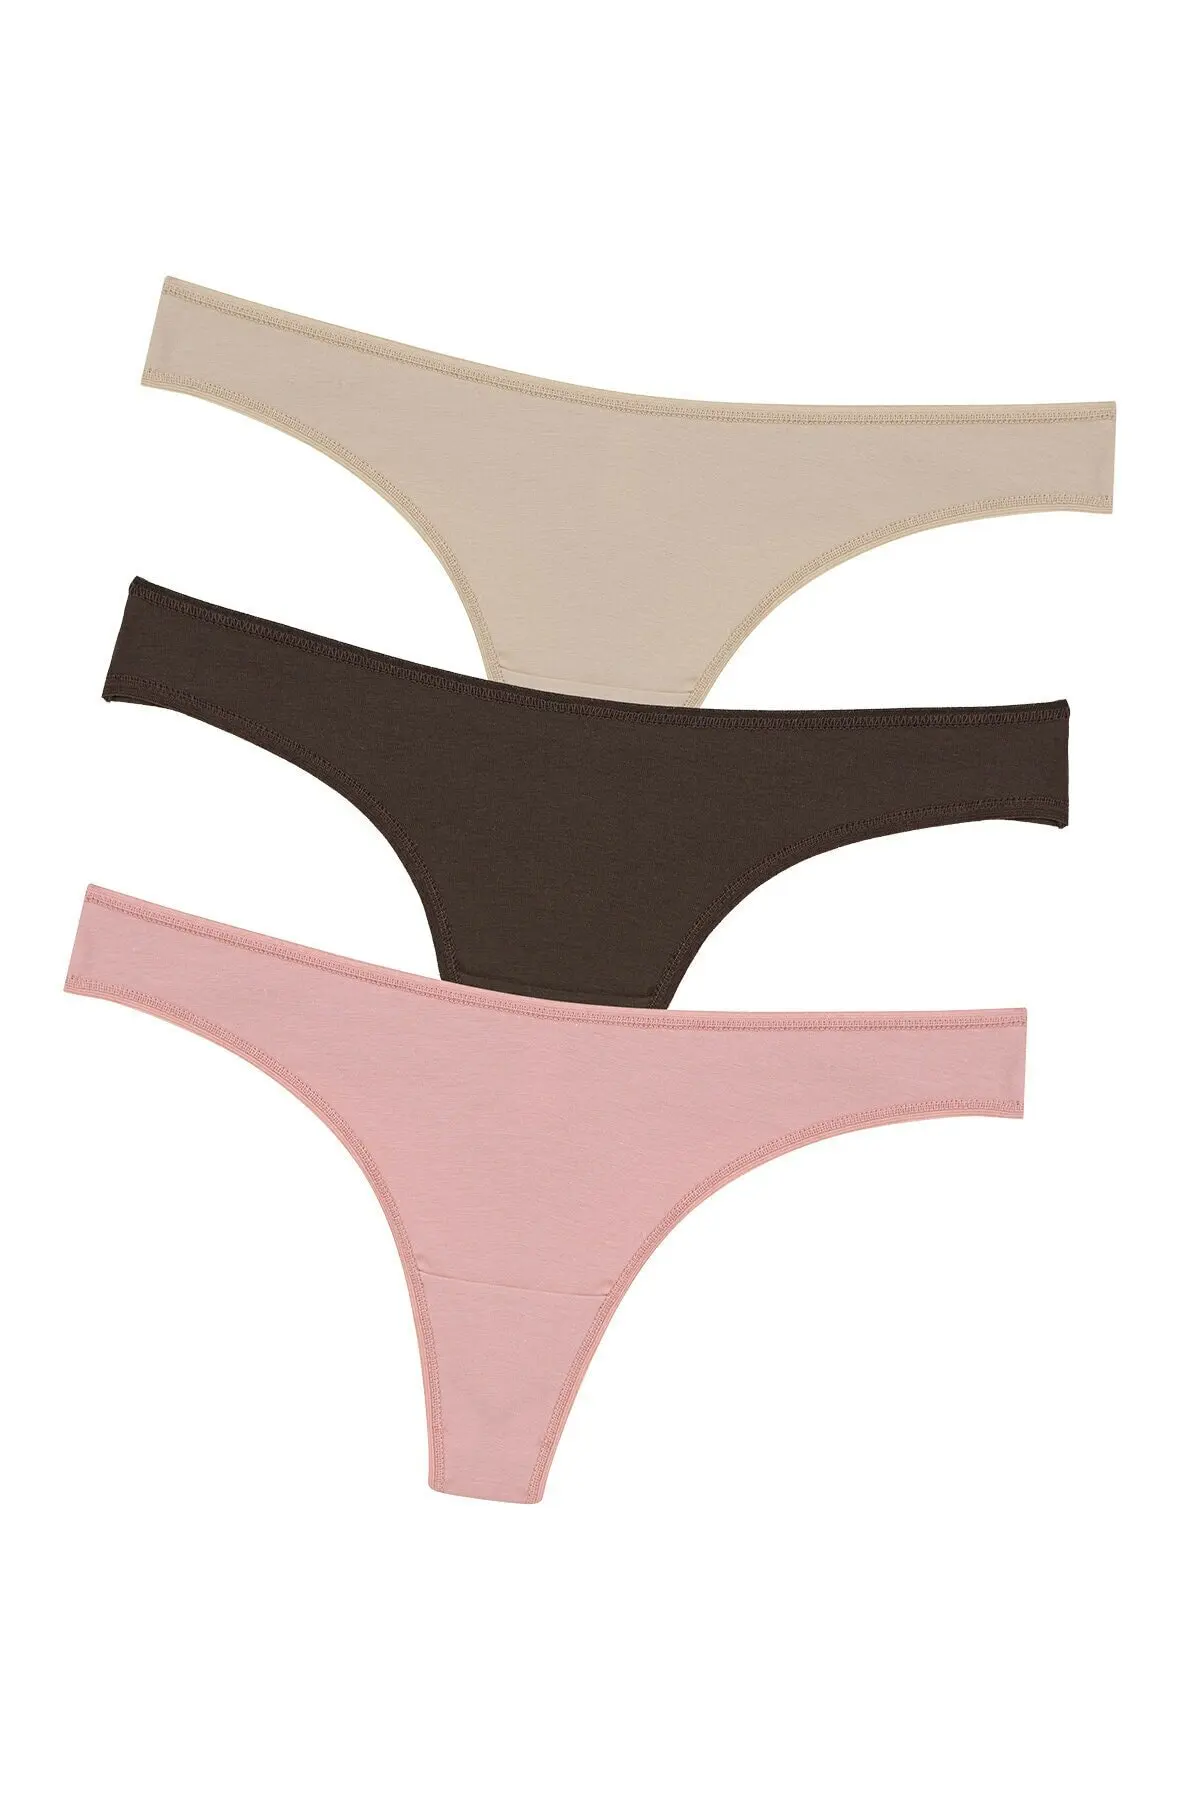 LOOK FOR YOUR WONDERFUL NIGHTS WITH ITS STUNNING Multicolored Perfect Nude 3 Piece Thong Panties FREE  SHIPPING